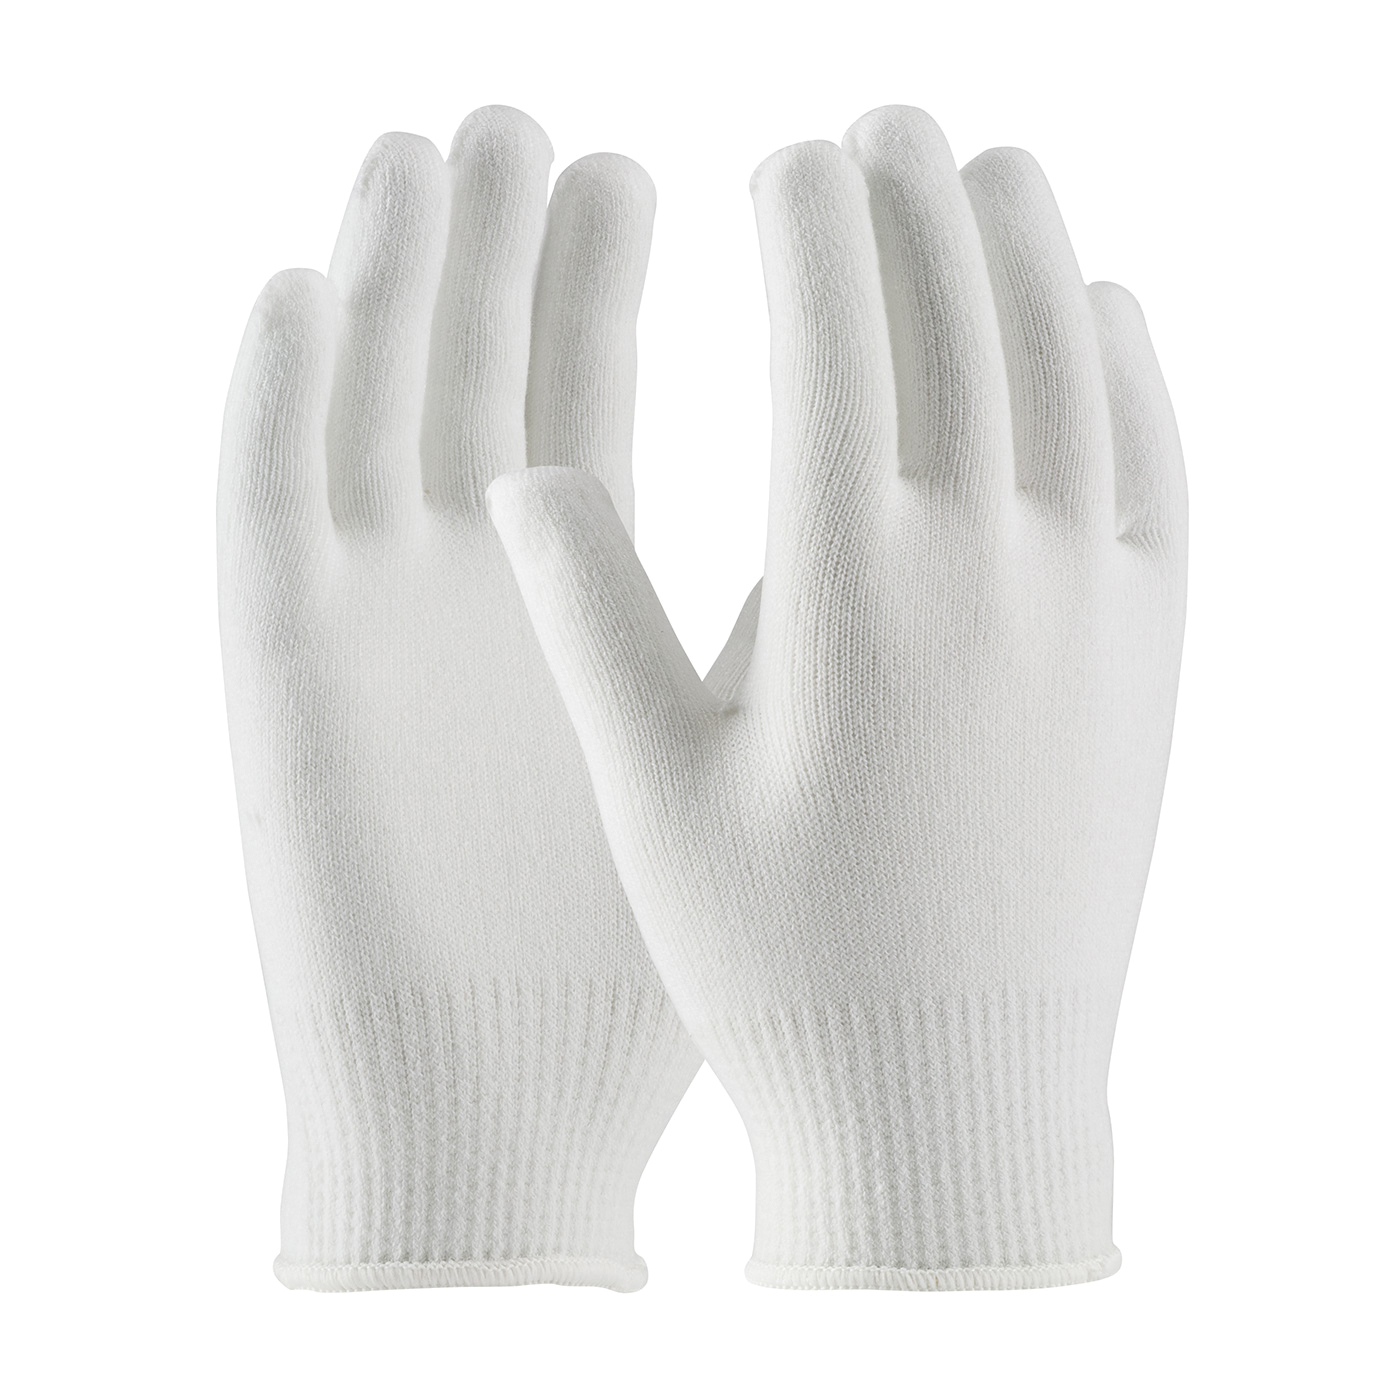 PIP® 41-002L Lightweight Gloves, Cold Weather, Seamless Style, L, Cotton/Polypropylene Palm, 13 ga Cotton/Polypropylene, White, Continuous Knit Wrist Cuff, Thermal Yarn/Lycra® Lining